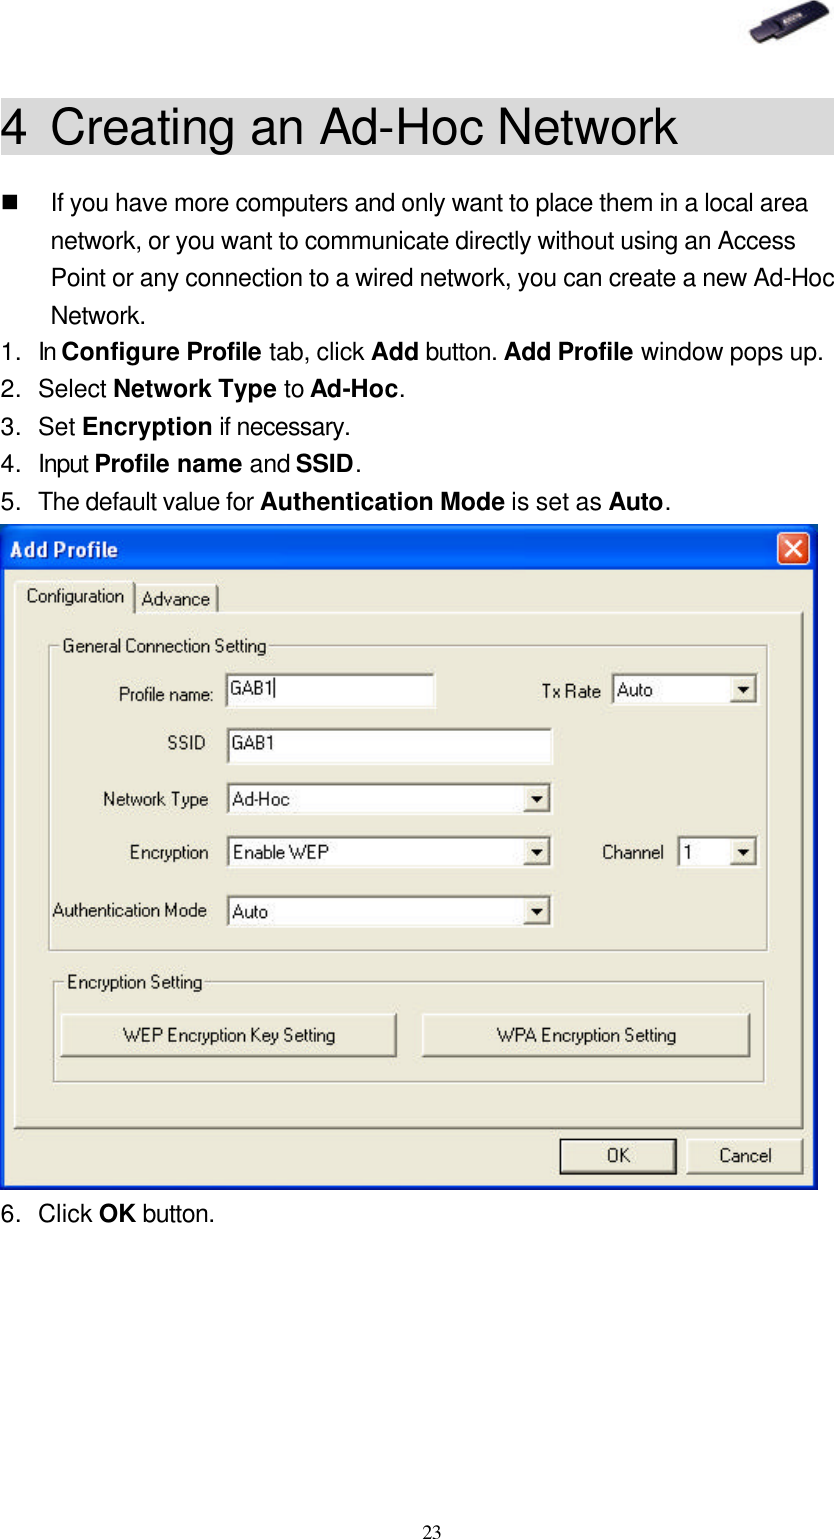   23 4 Creating an Ad-Hoc Network         n If you have more computers and only want to place them in a local area network, or you want to communicate directly without using an Access Point or any connection to a wired network, you can create a new Ad-Hoc Network. 1. In Configure Profile tab, click Add button. Add Profile window pops up. 2. Select Network Type to Ad-Hoc. 3. Set Encryption if necessary. 4. Input Profile name and SSID. 5. The default value for Authentication Mode is set as Auto.  6. Click OK button. 